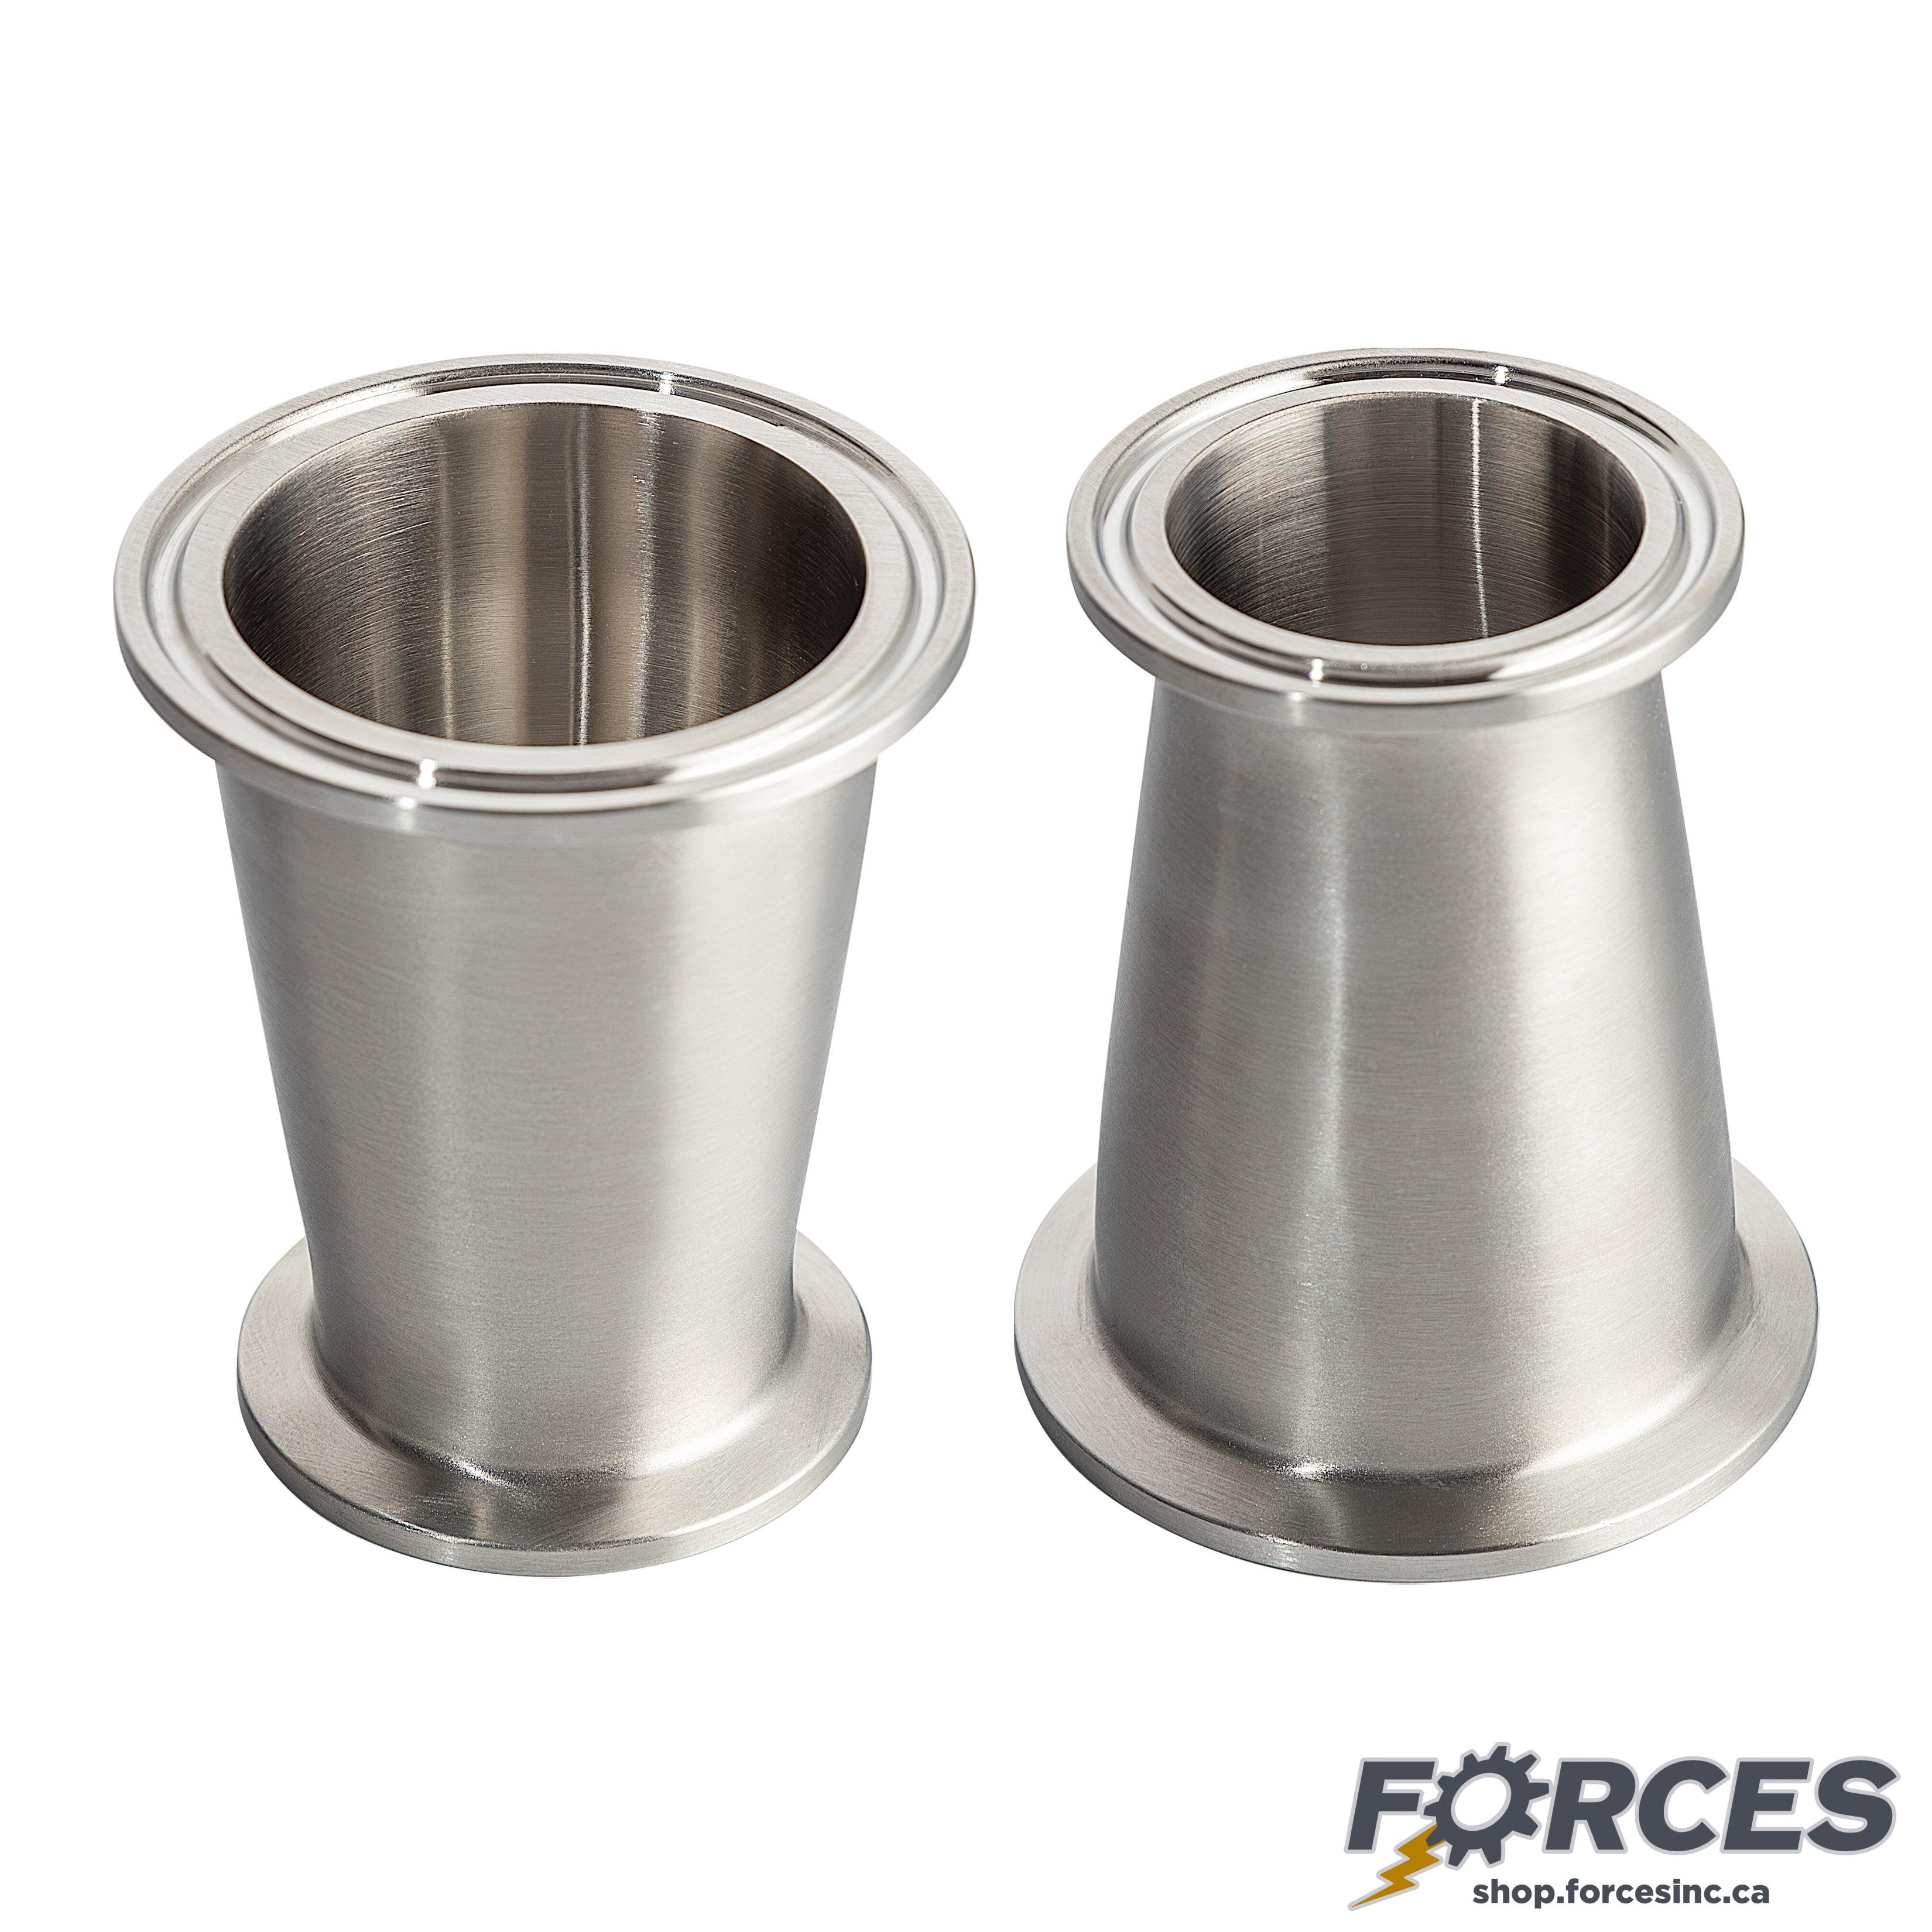 2" x 1-1/2" Tri-Clamp Concentric Reducer - Stainless Steel 316 - Forces Inc